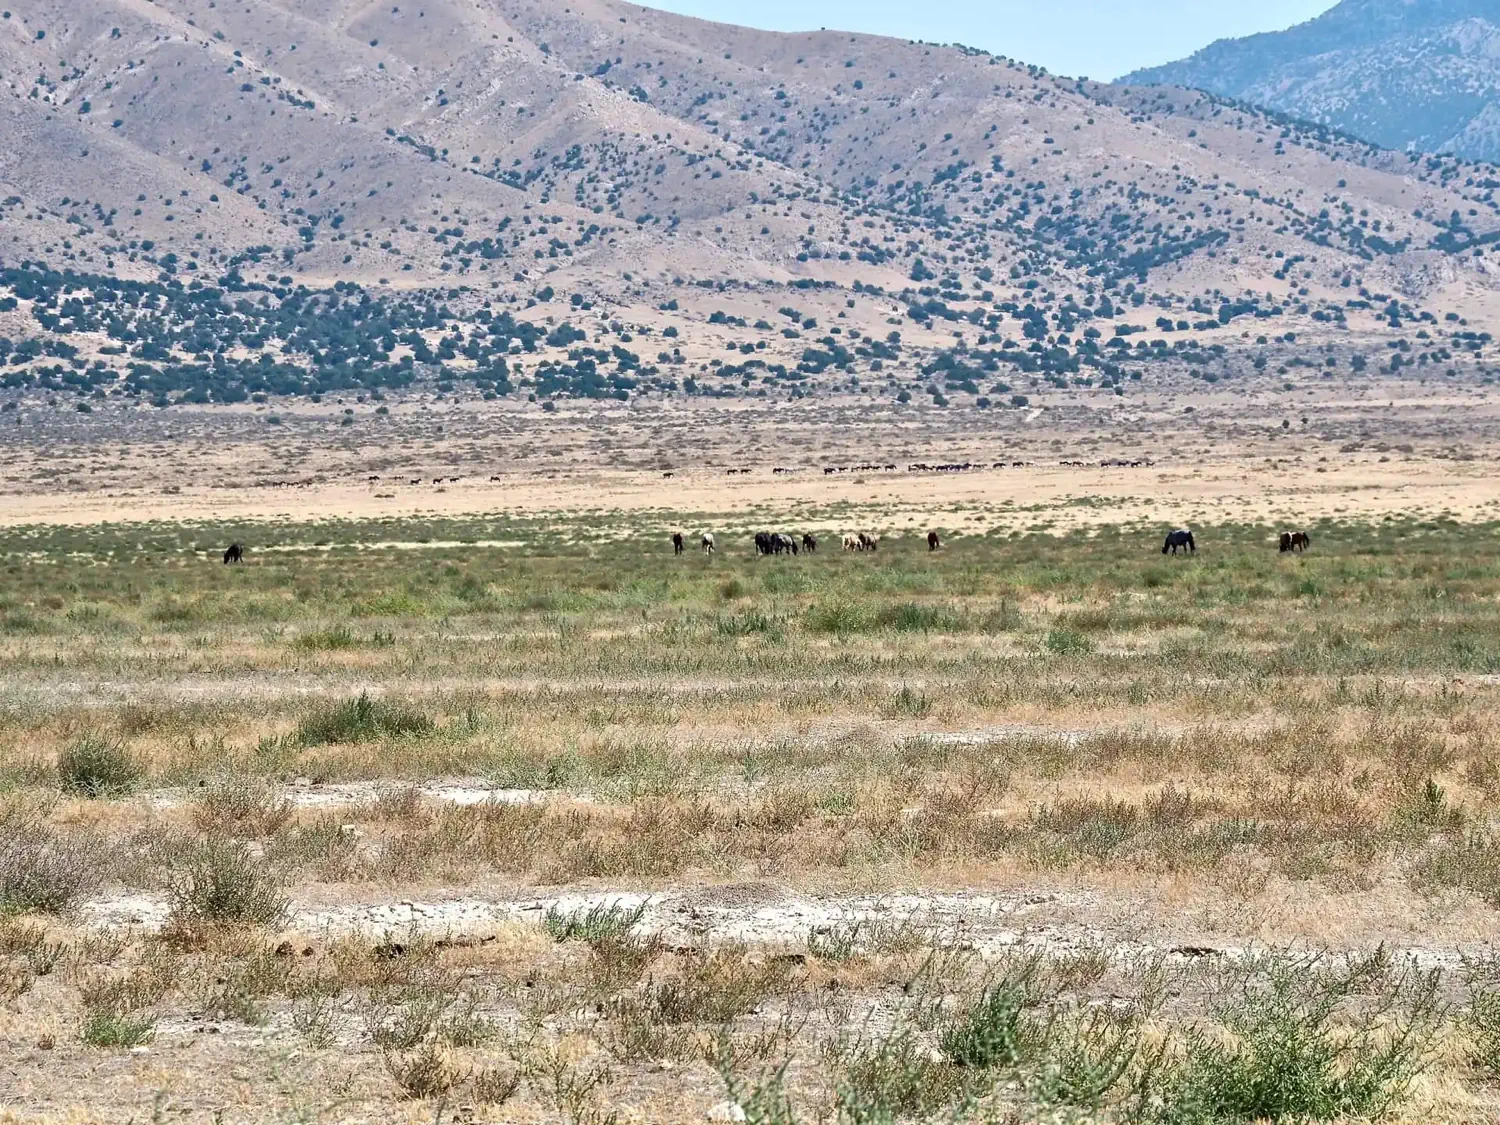 A group of wild horses is off in the distance